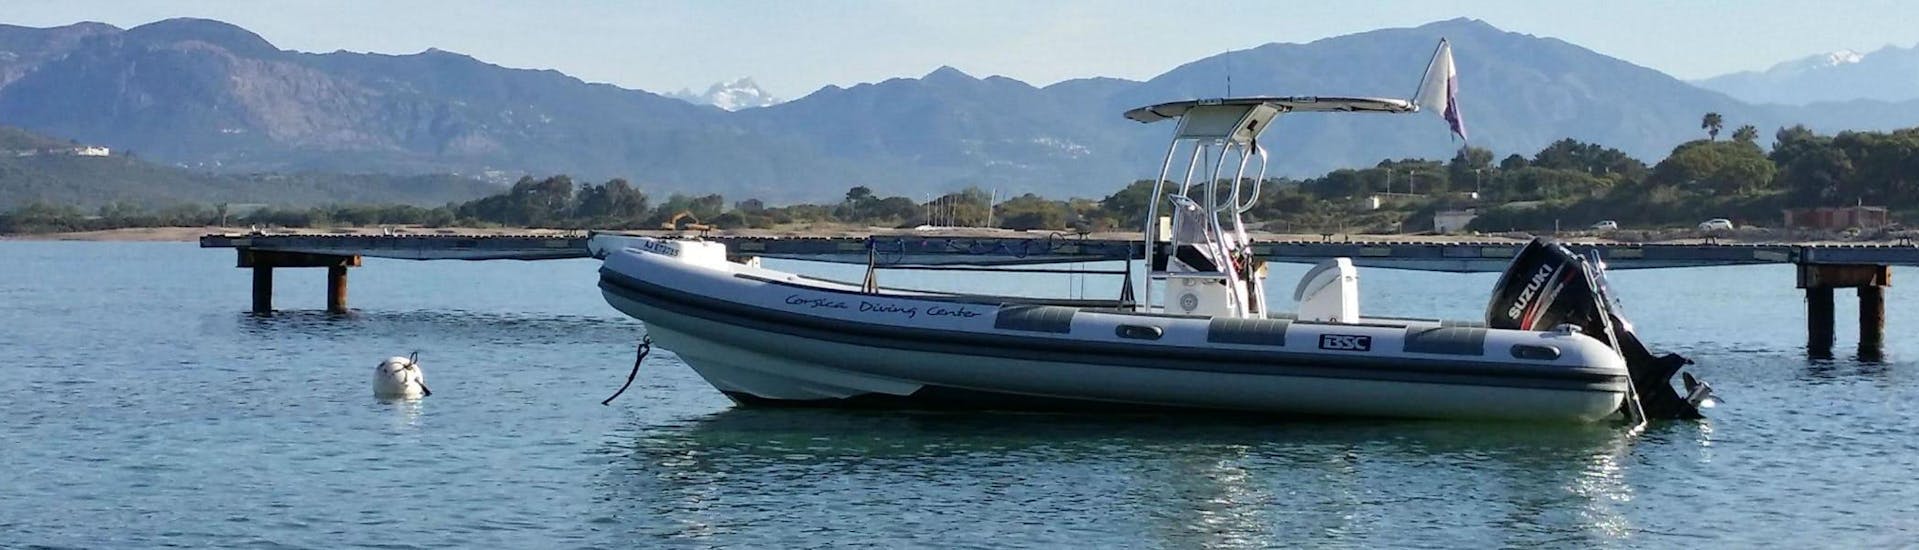 Picture of the boat during the PADI Open Water Diver Course in Golf d'Ajaccio for Beginners activity with Maeva Plongée.